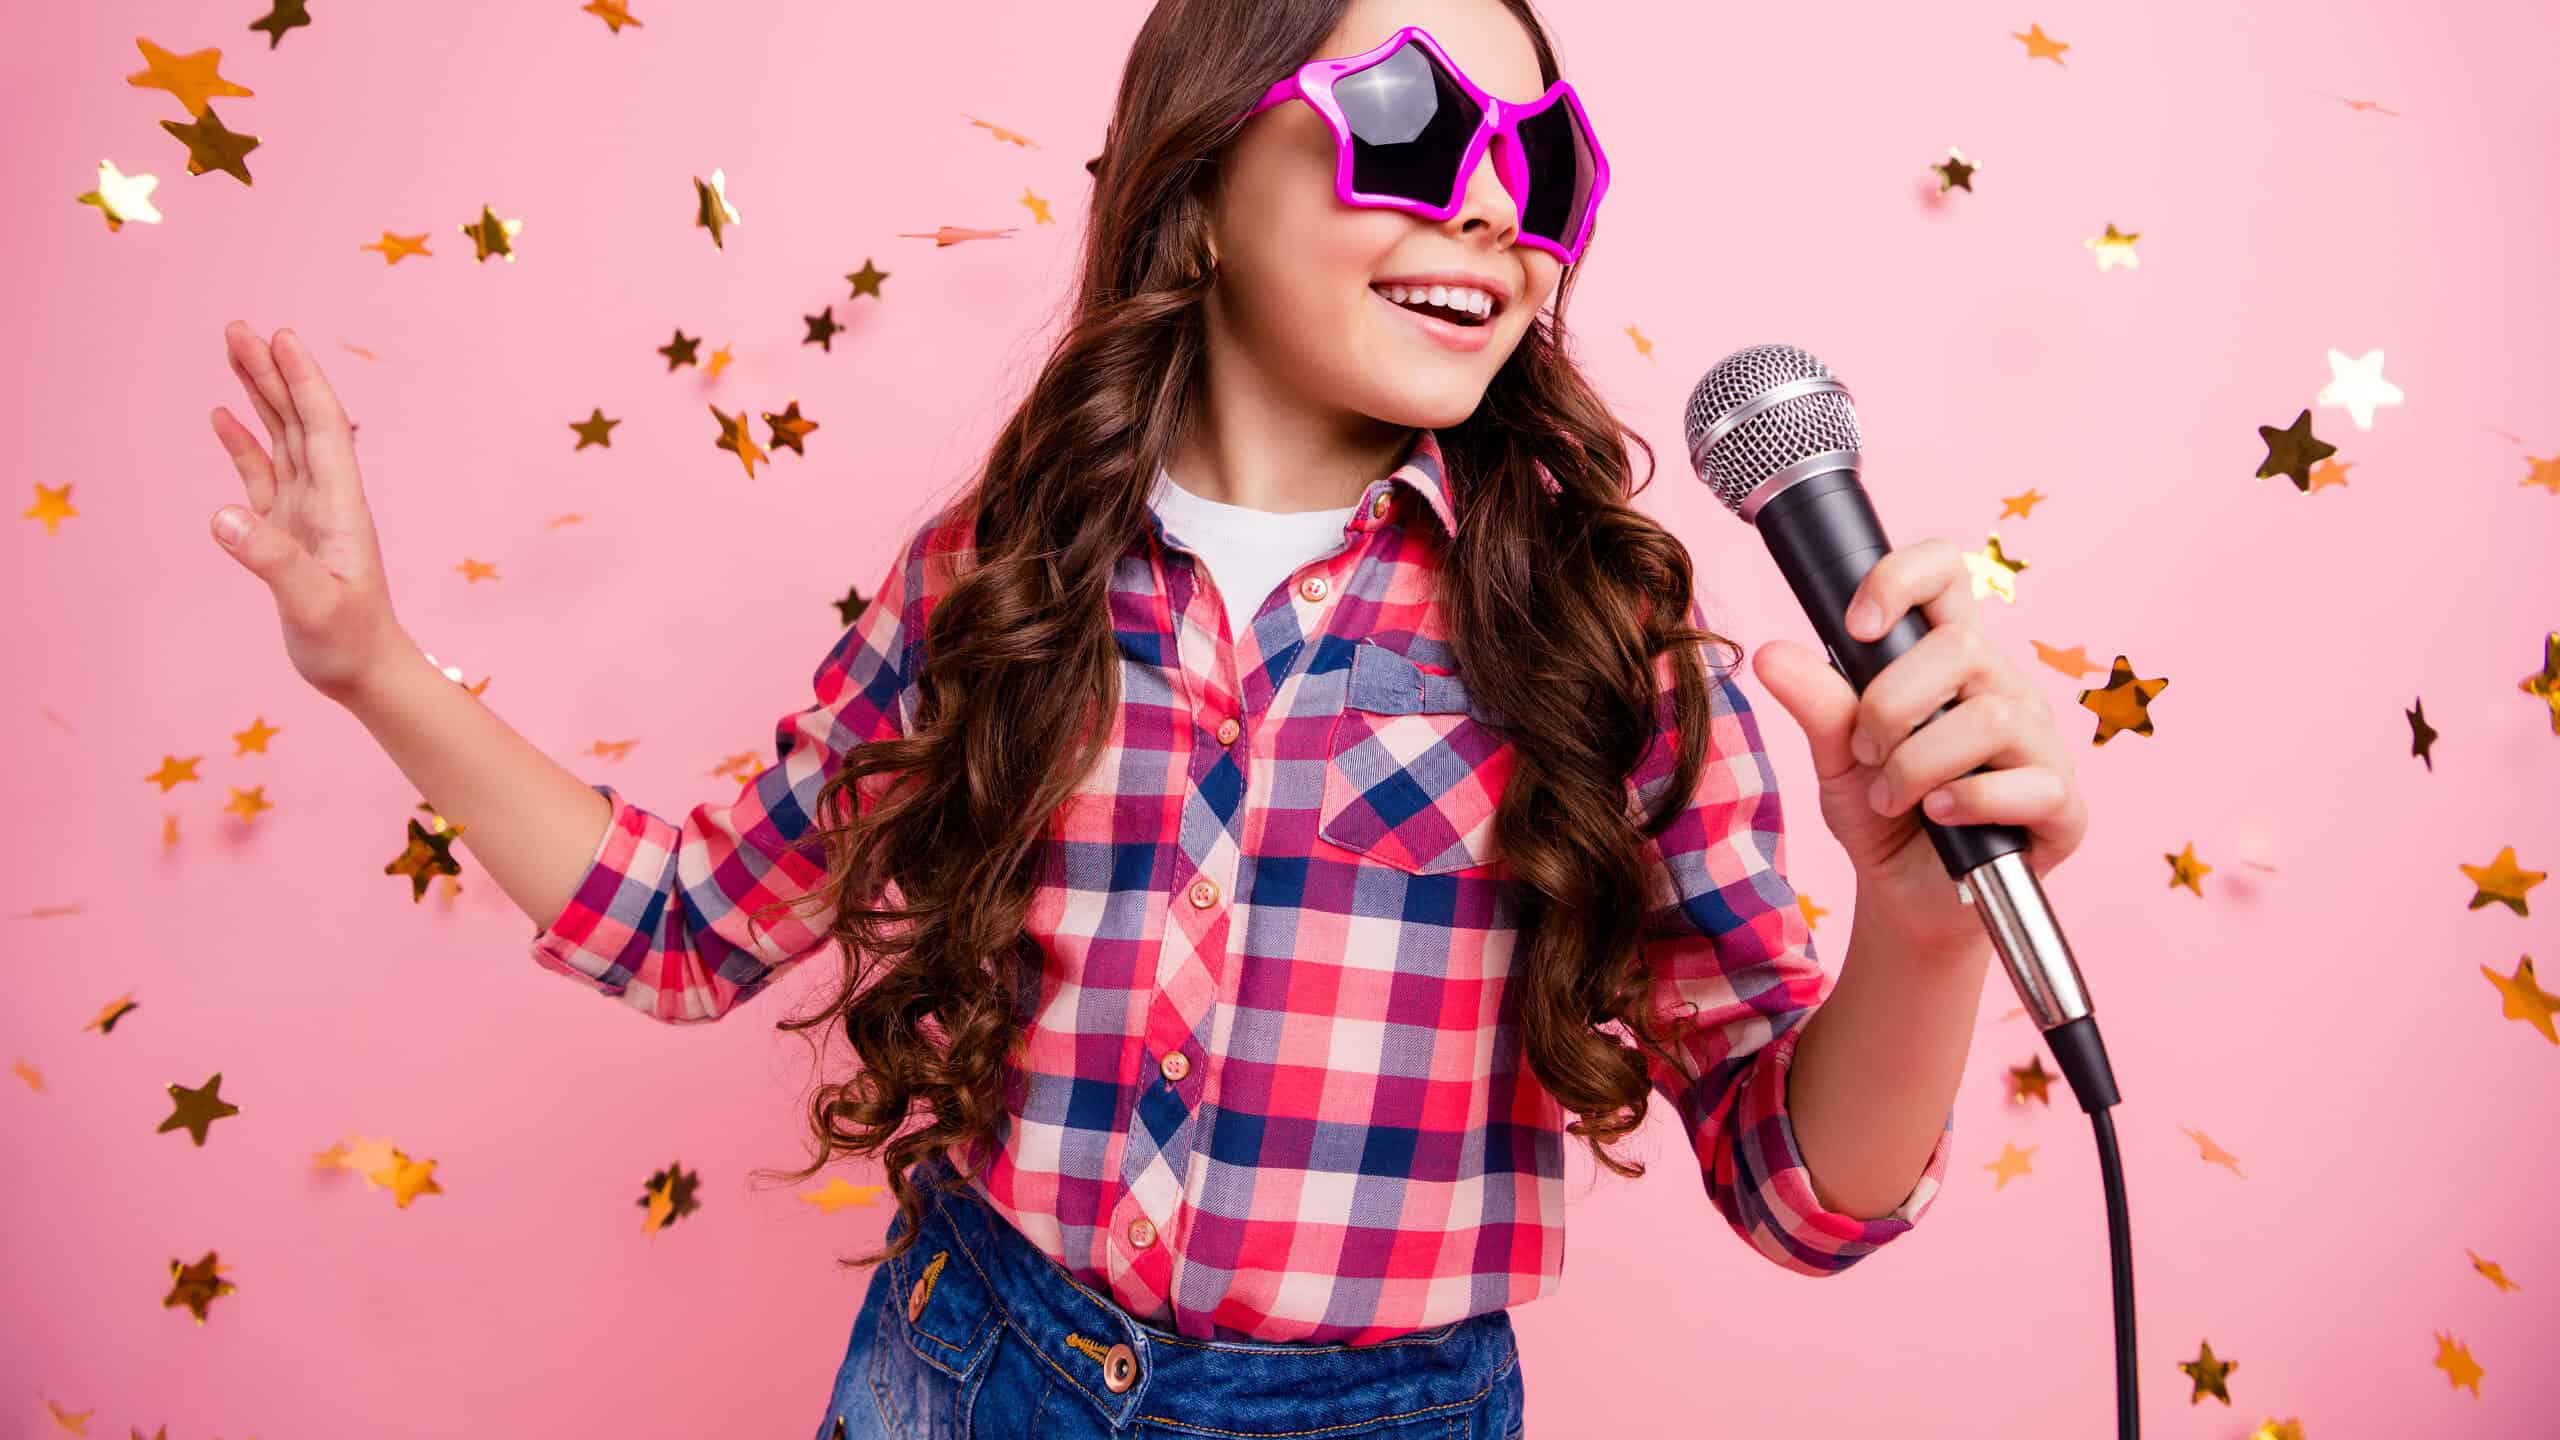 The 20 Best Toys For 8-Year-Old Girls